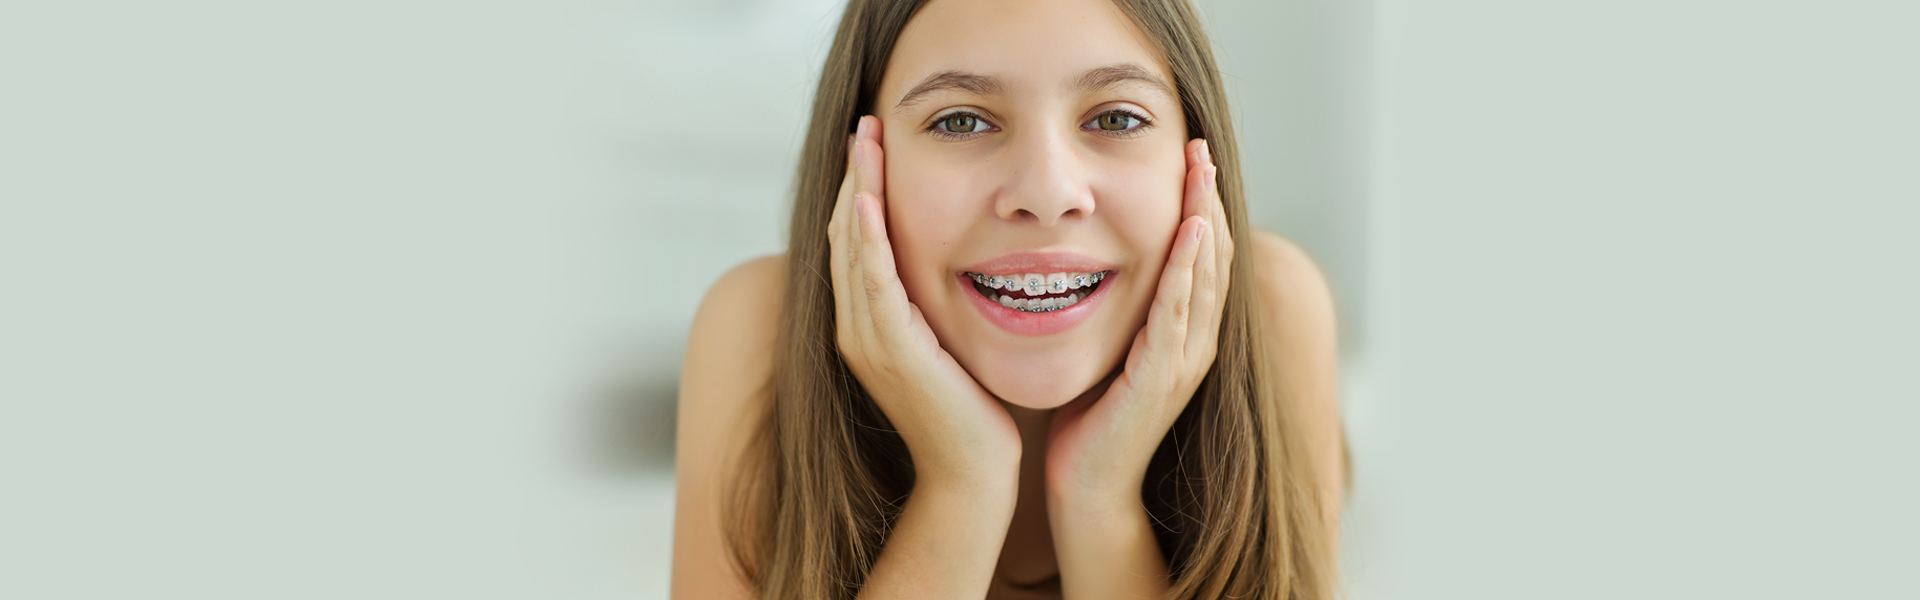 5 Common Benefits of Visiting an Orthodontist